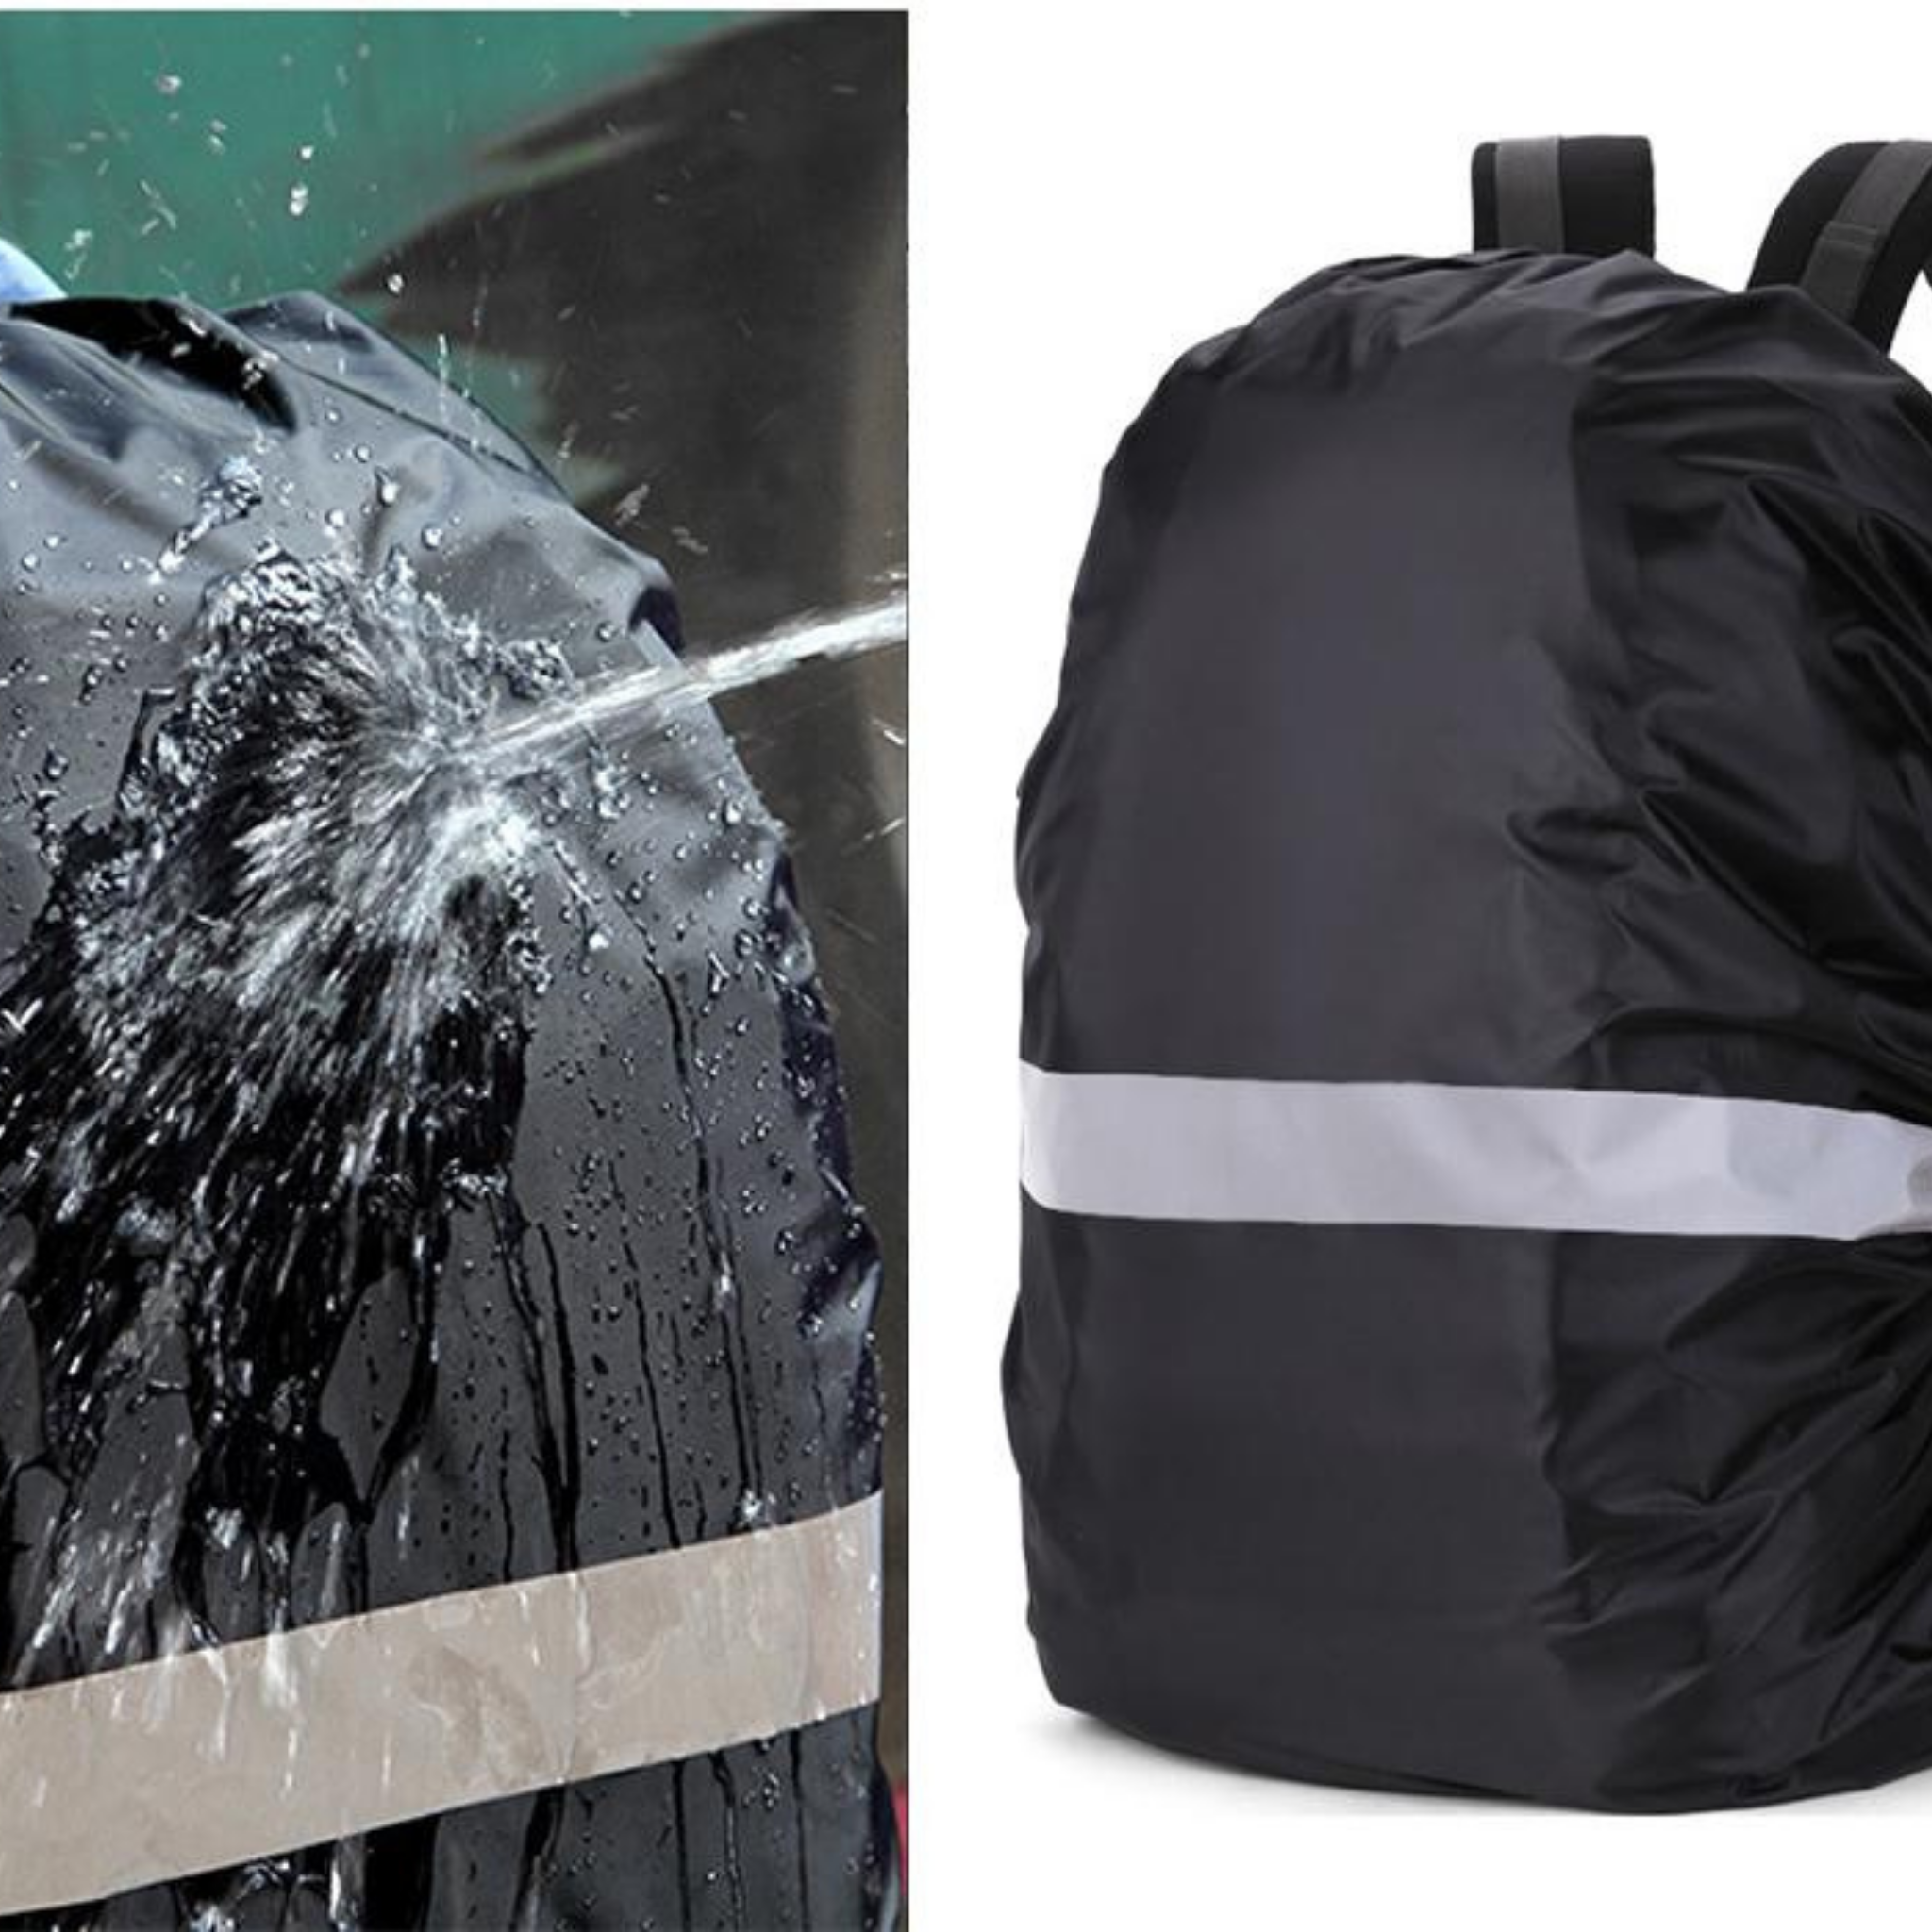 Backpack Waterproof Cover - Wet Nose Buddy